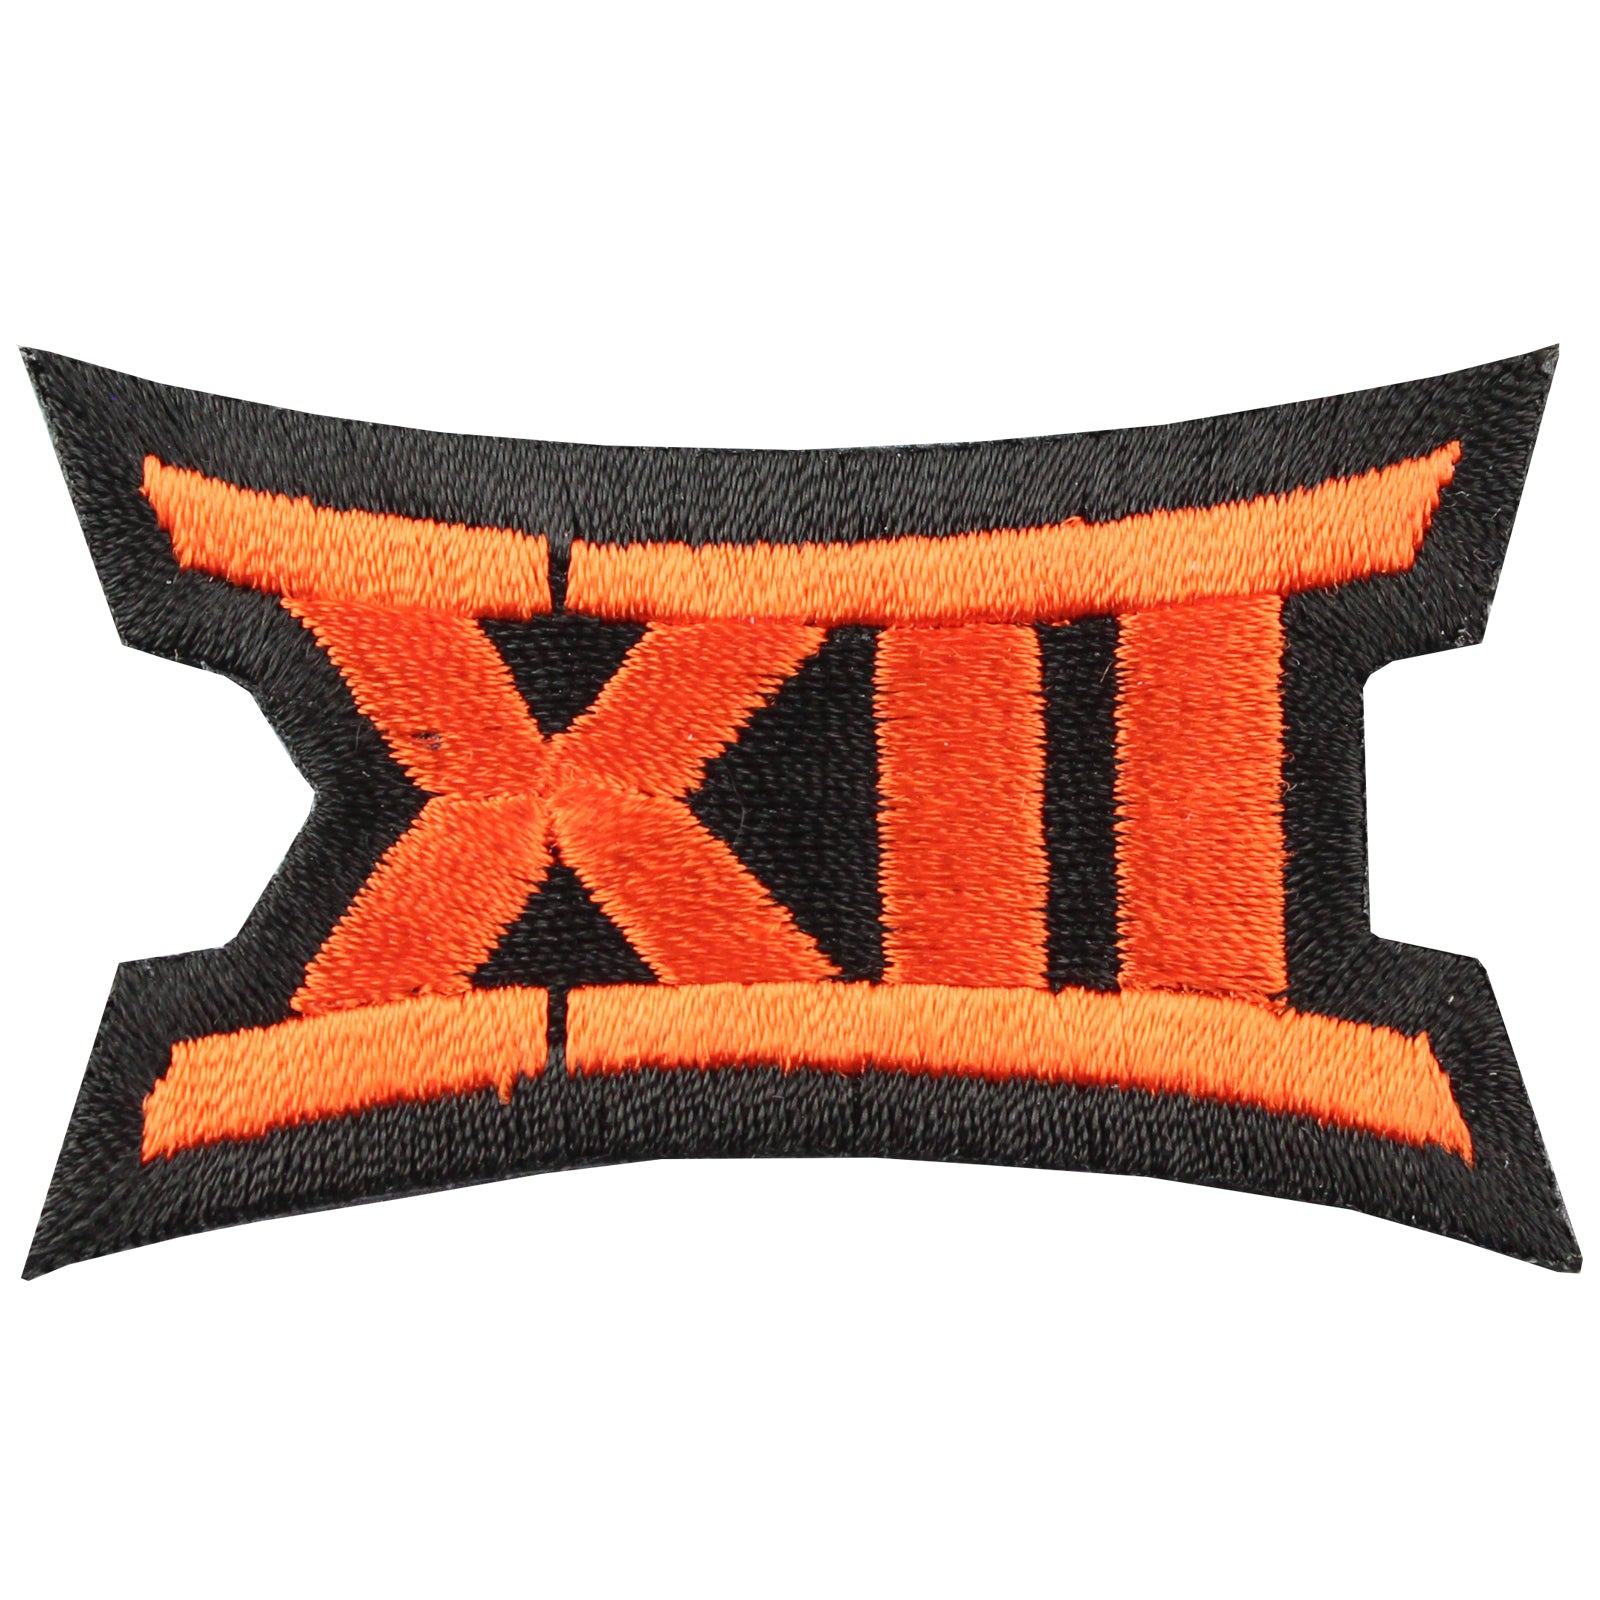 Big 12 XII Conference Team Jersey Uniform Patch Oklahoma State Cowboys 